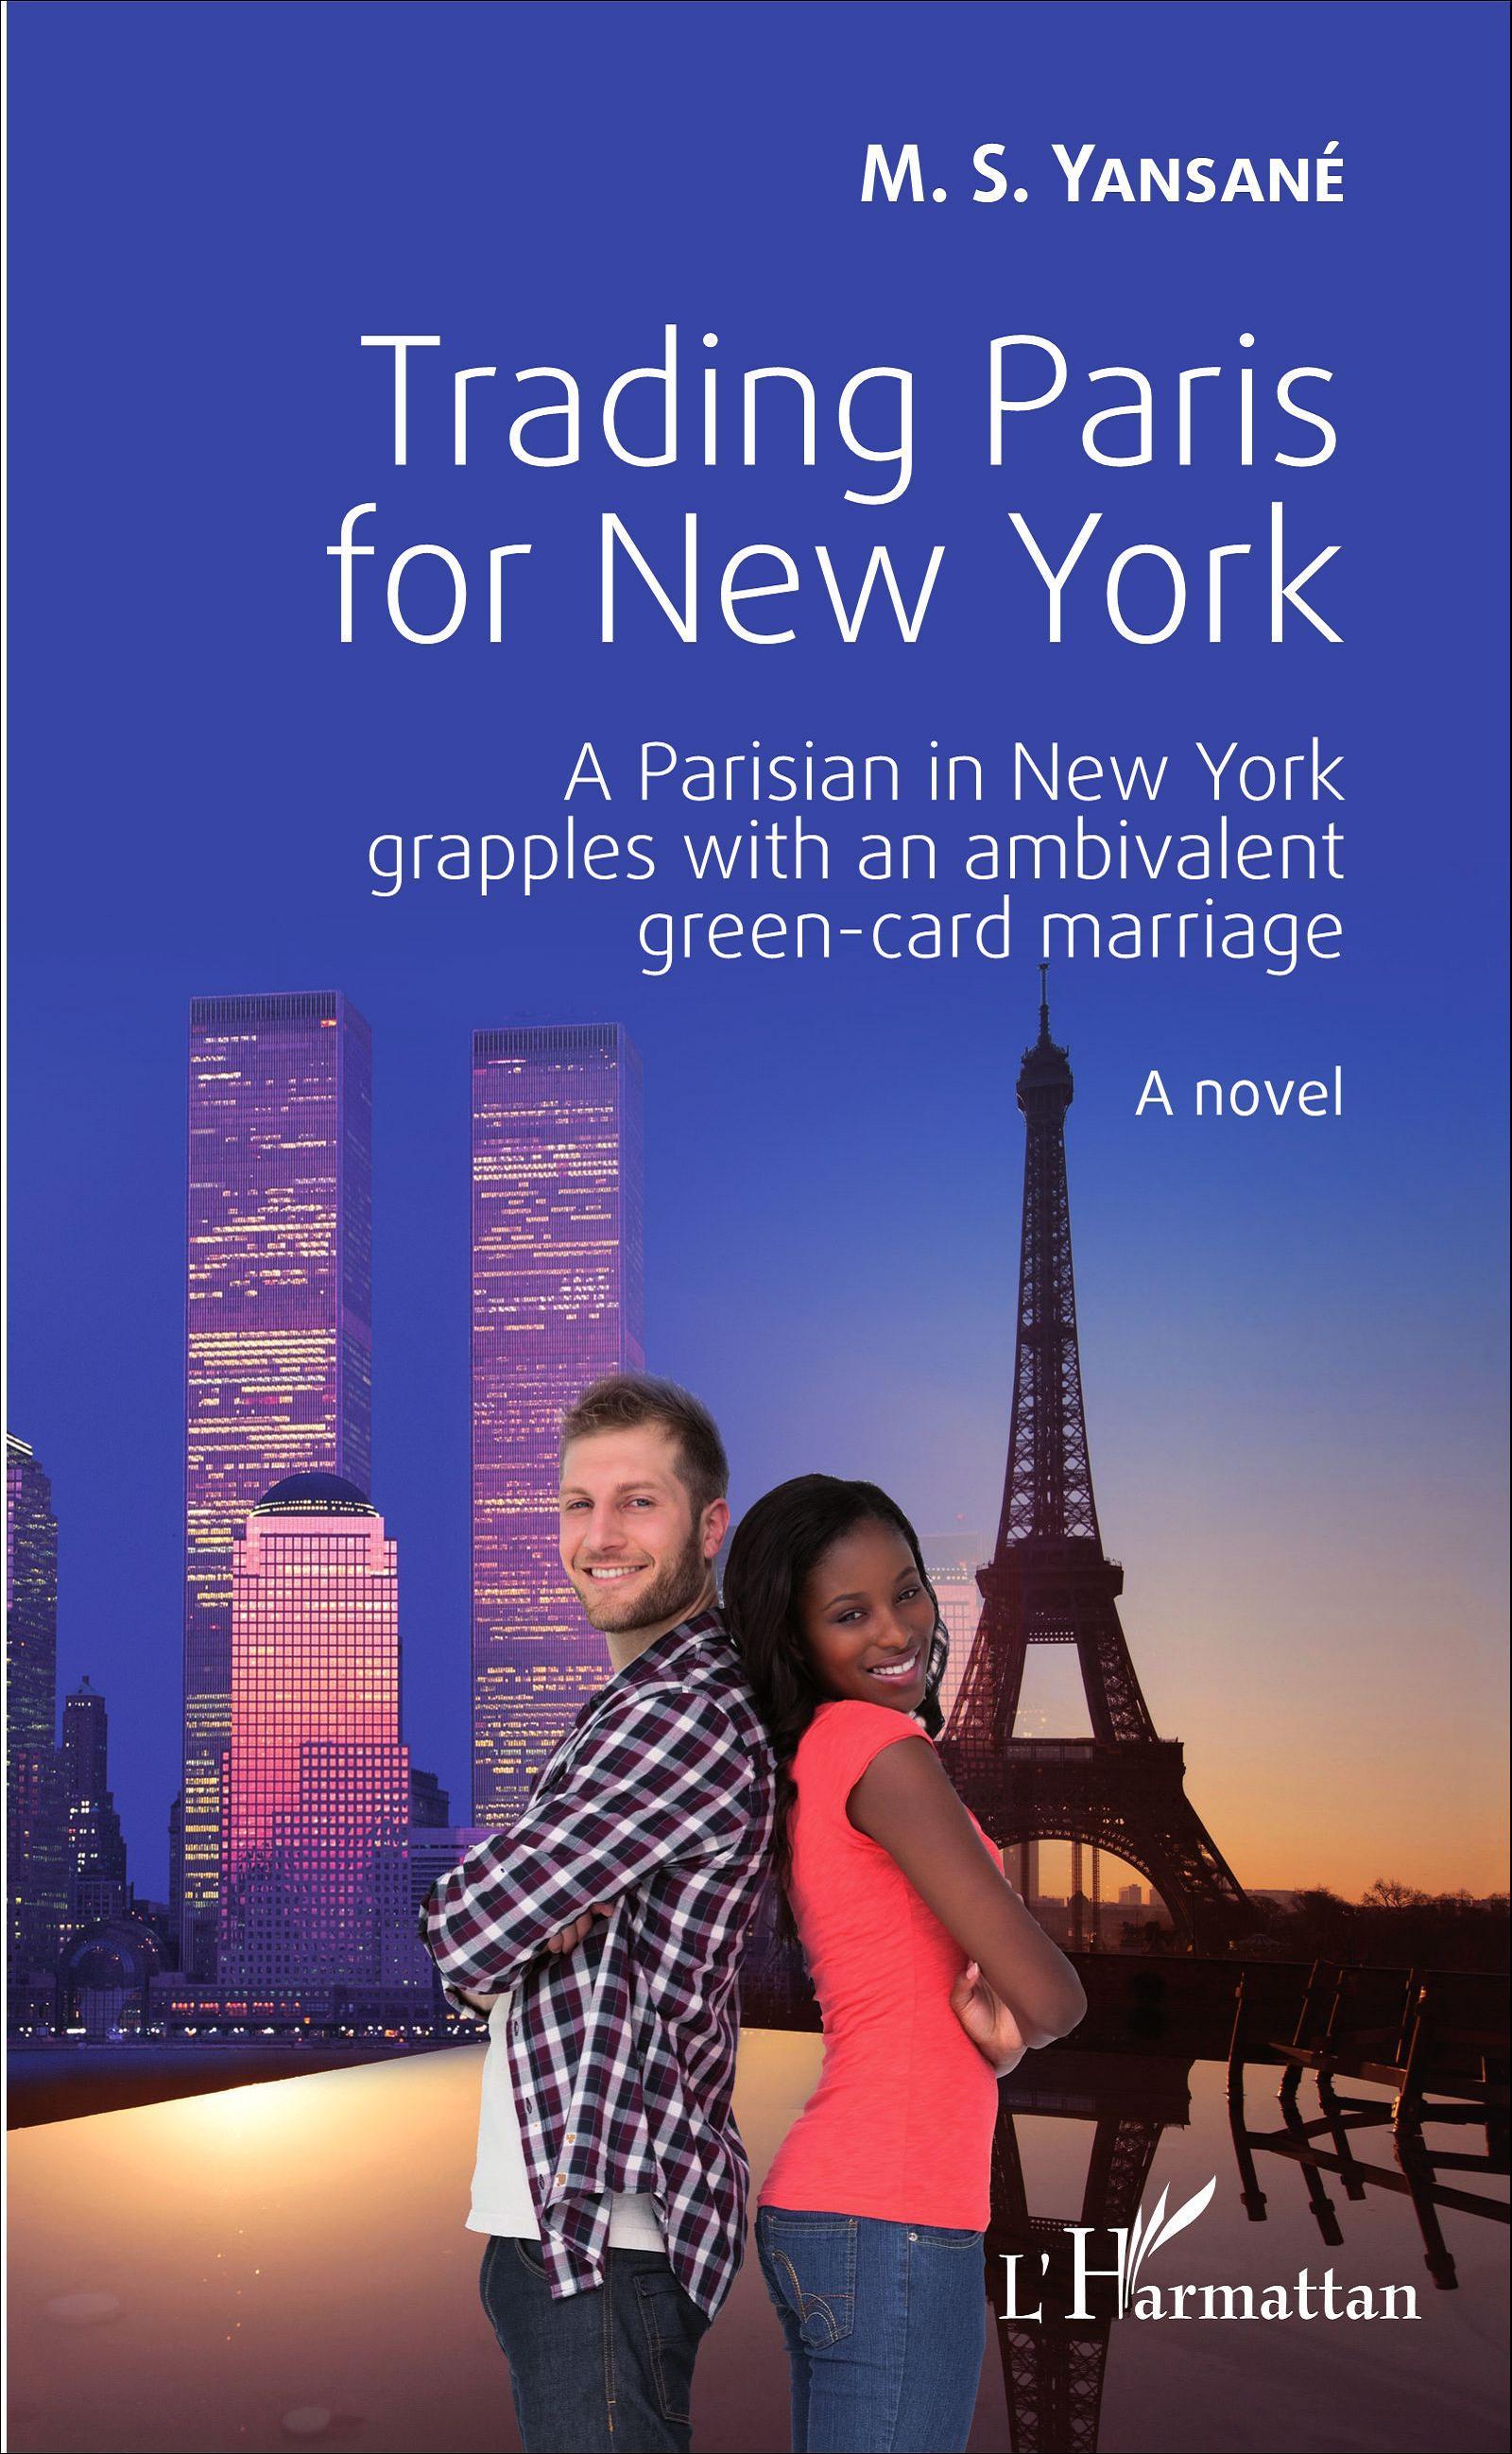 Trading Paris for New York, A Parisian in New York grapples with an ambivalent green-card marriage (9782343079783-front-cover)